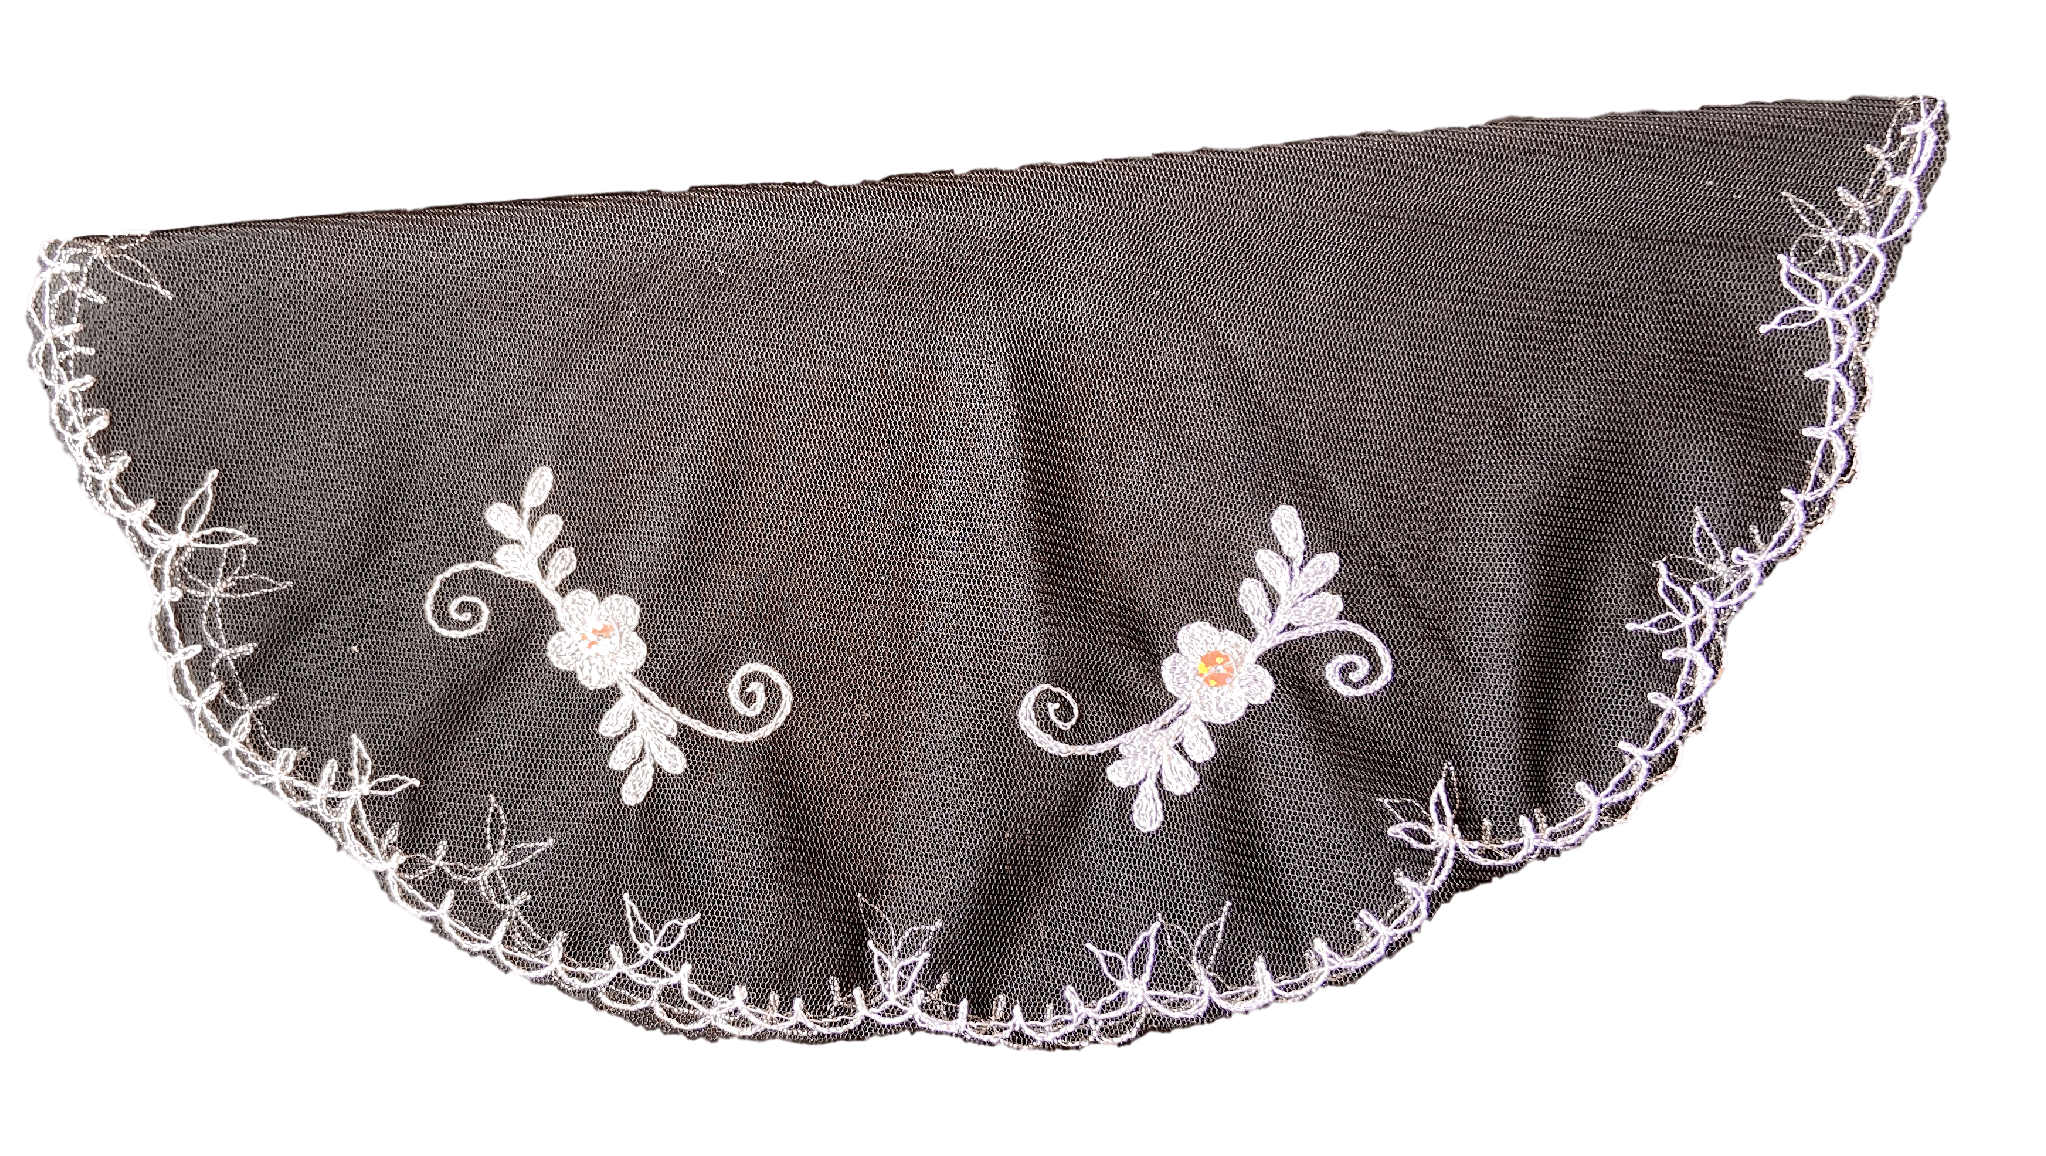 Sacrament Lace Veil Mass Head Coverings Mantilla Handcrafted Round Shape Black Detailing White - Ysleta Mission Gift Shop- VOTED El Paso's Best Gift Shop